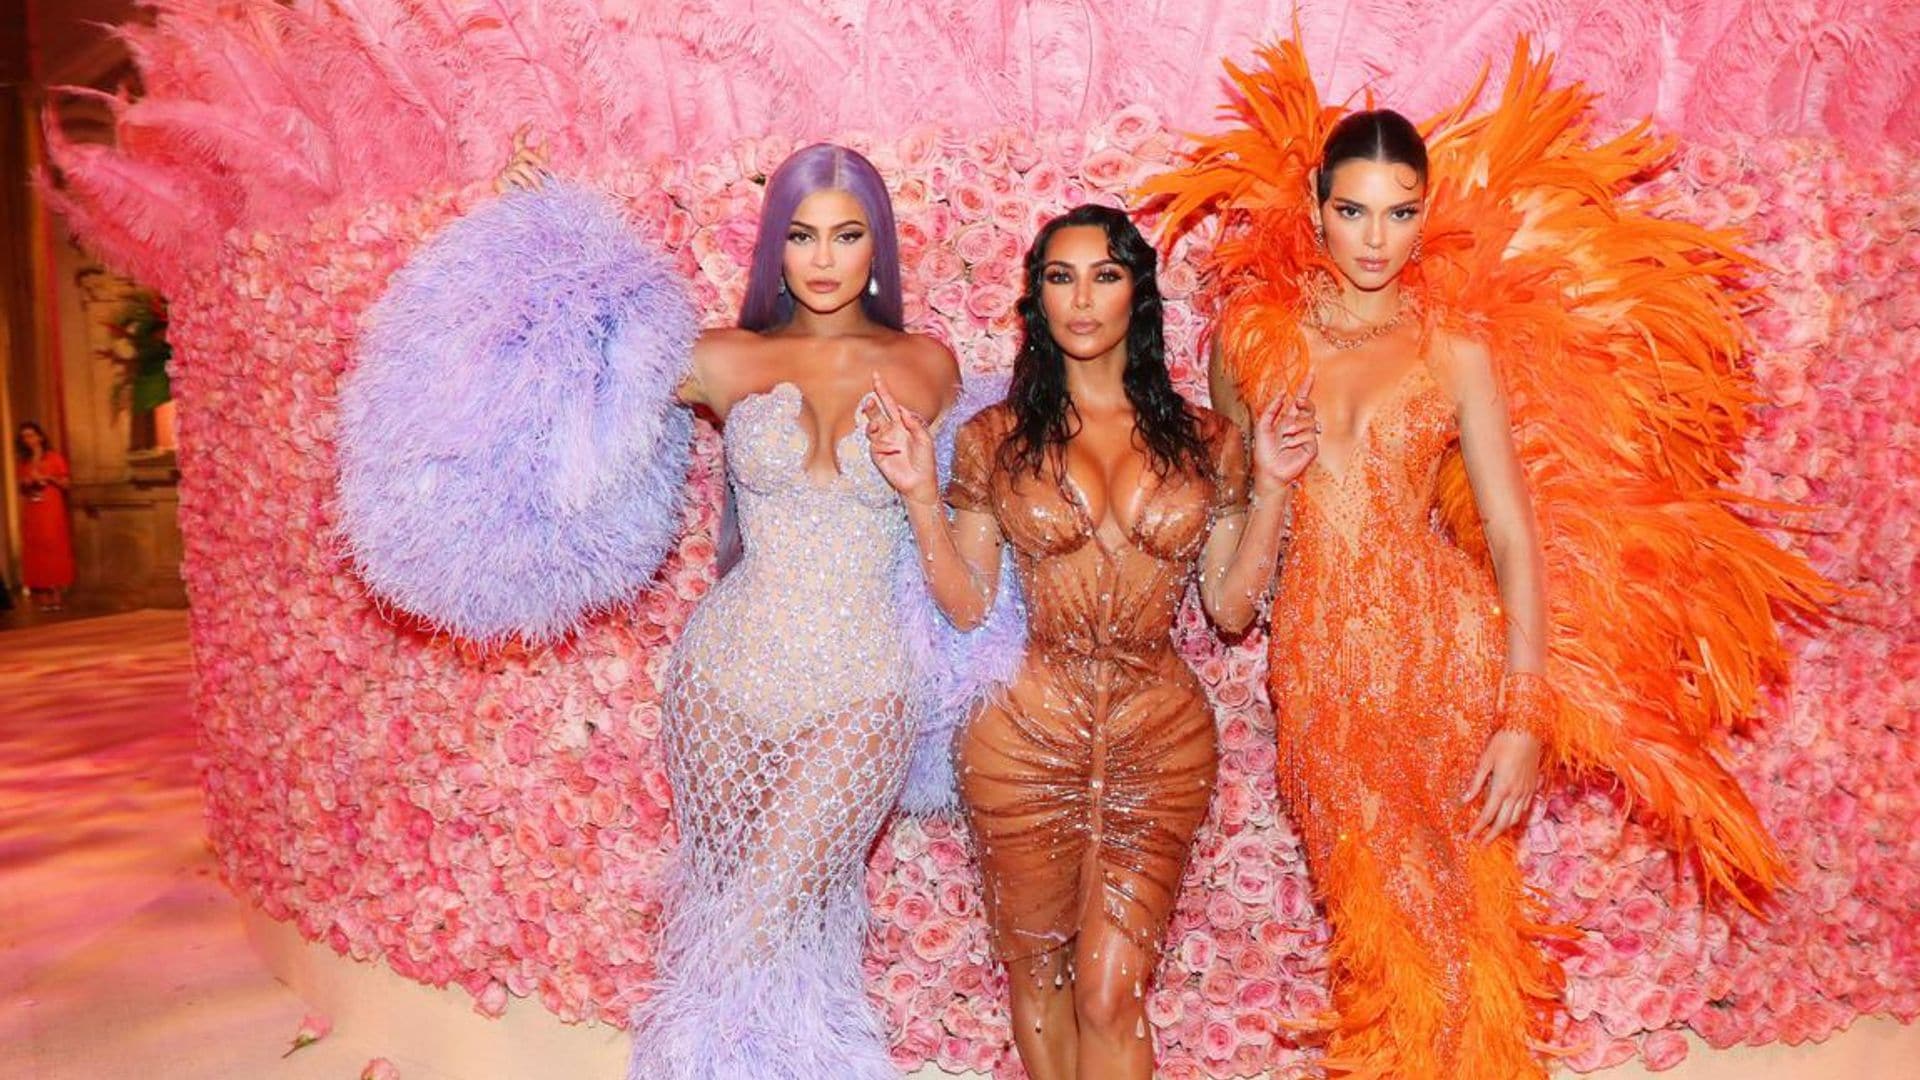 “Keeping Up With the Kardashians” may have ended due to business reasons, sources say